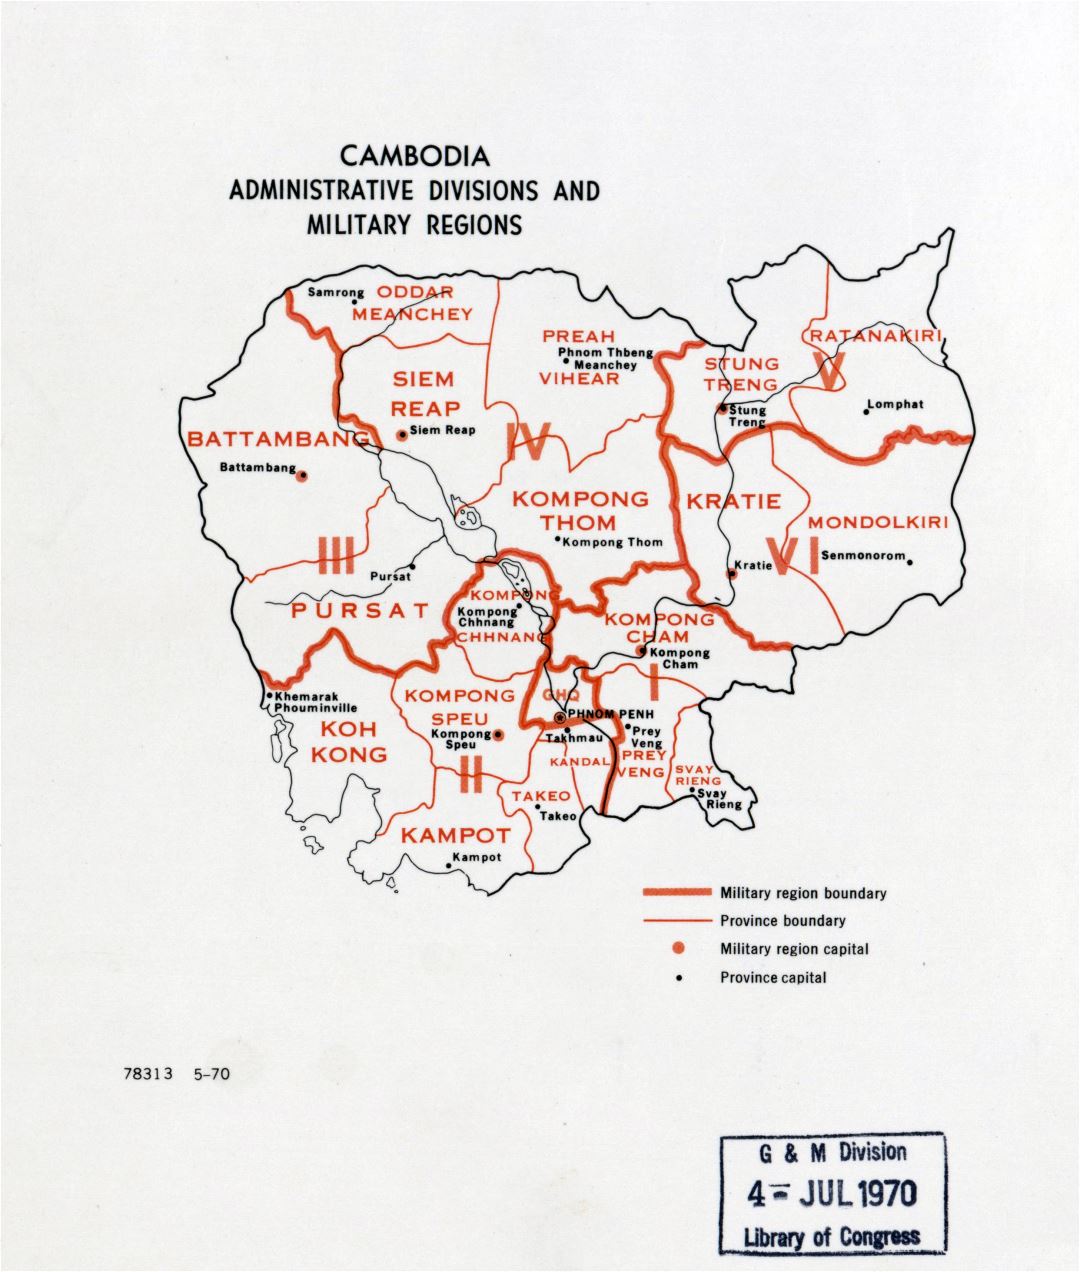 Large detailed administrative divisions and military regions map of Cambodia - 1970